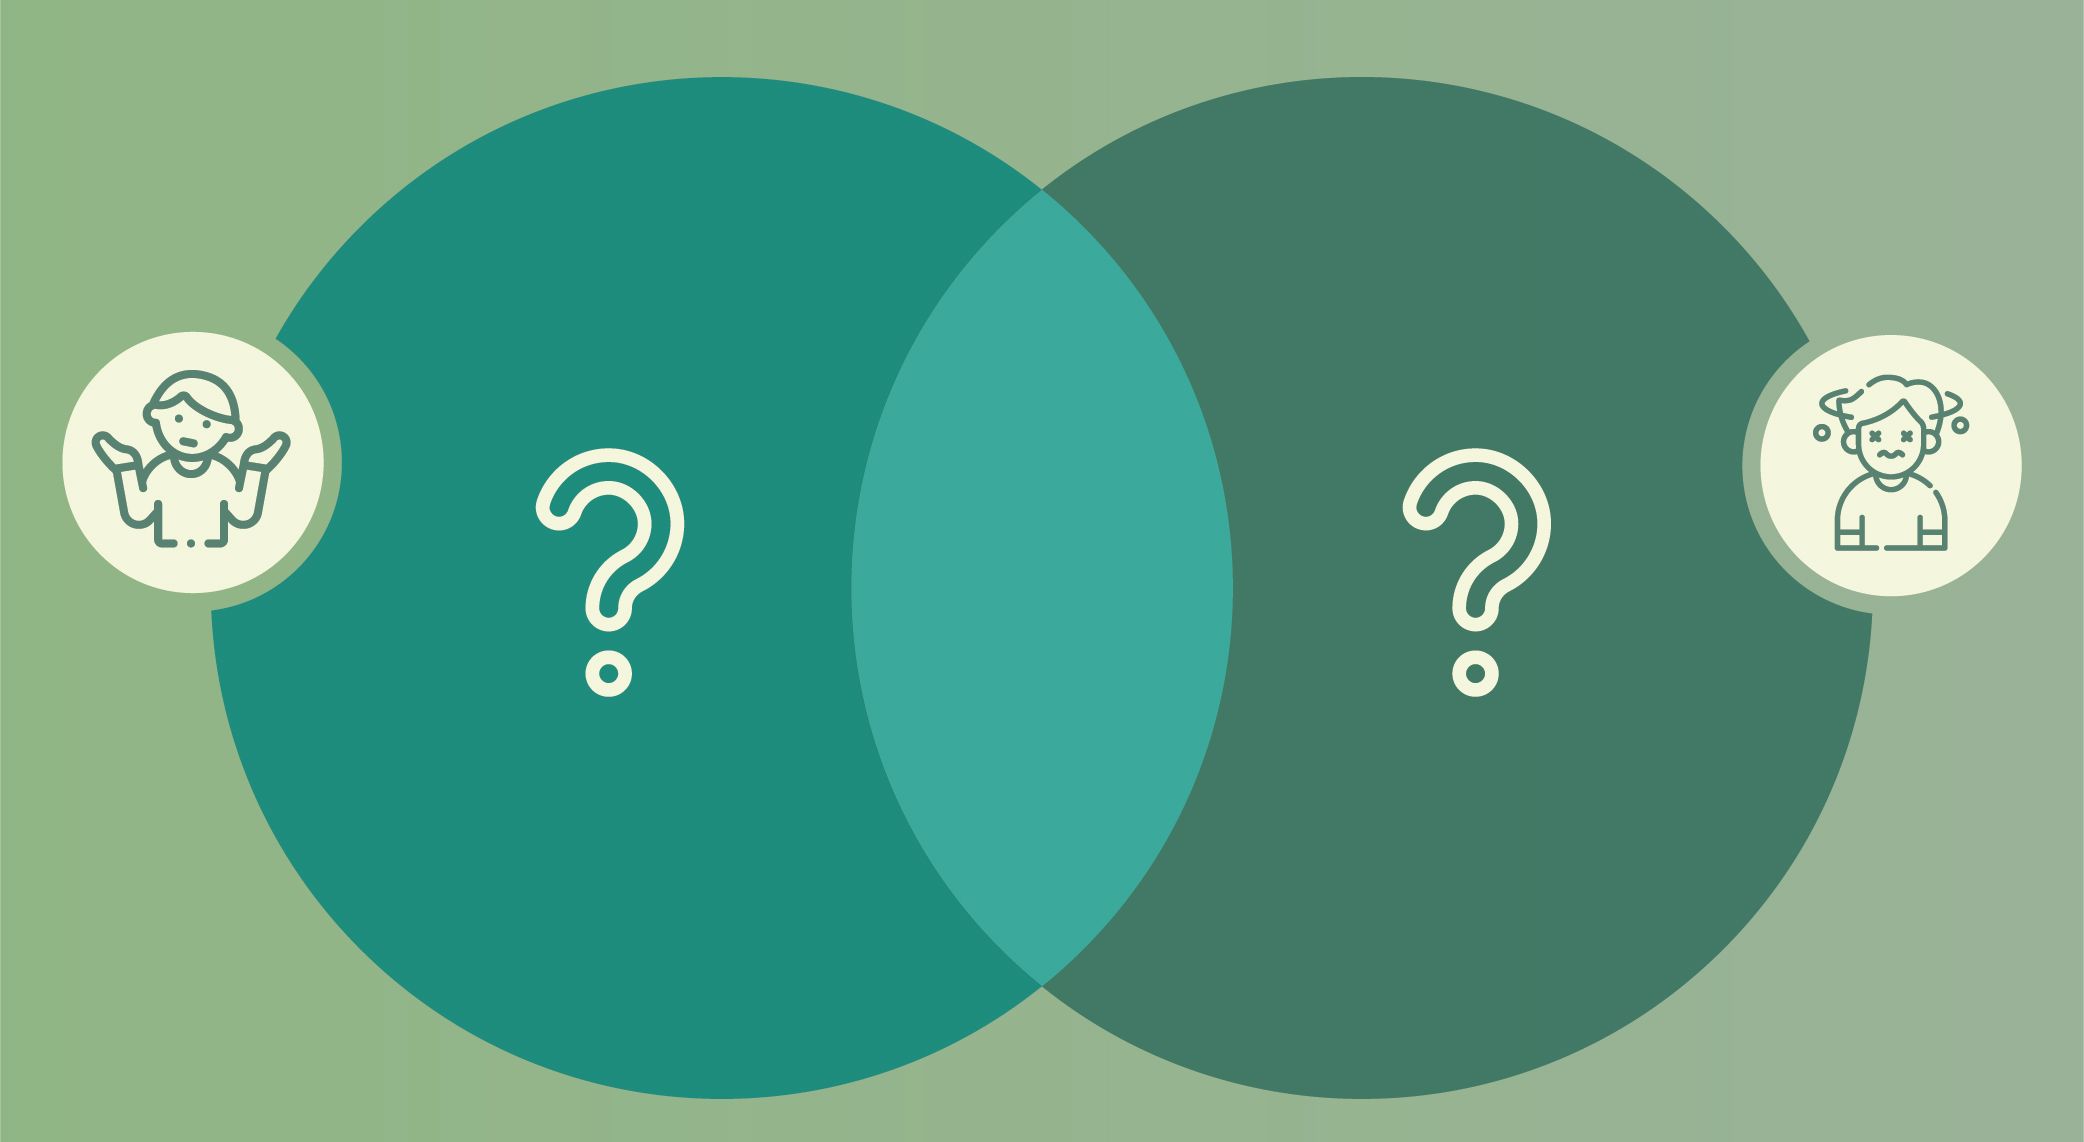 A venn diagram with 2 partially overlapping circles with a question mark in each circle. This visually represents the question "What two aspects to you need to be successful at SEO?"